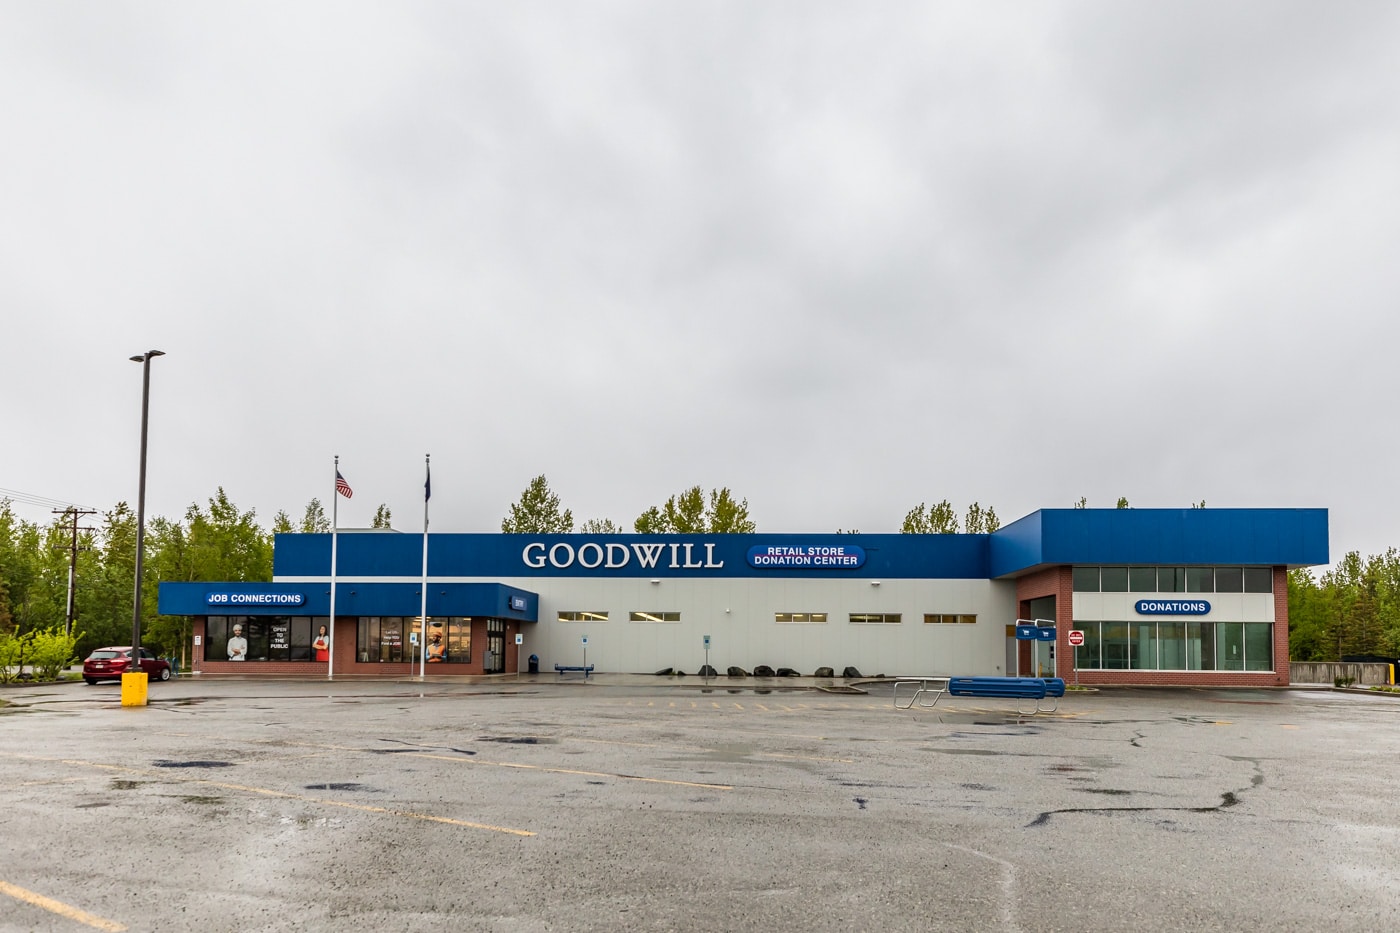 Goodwill entire building